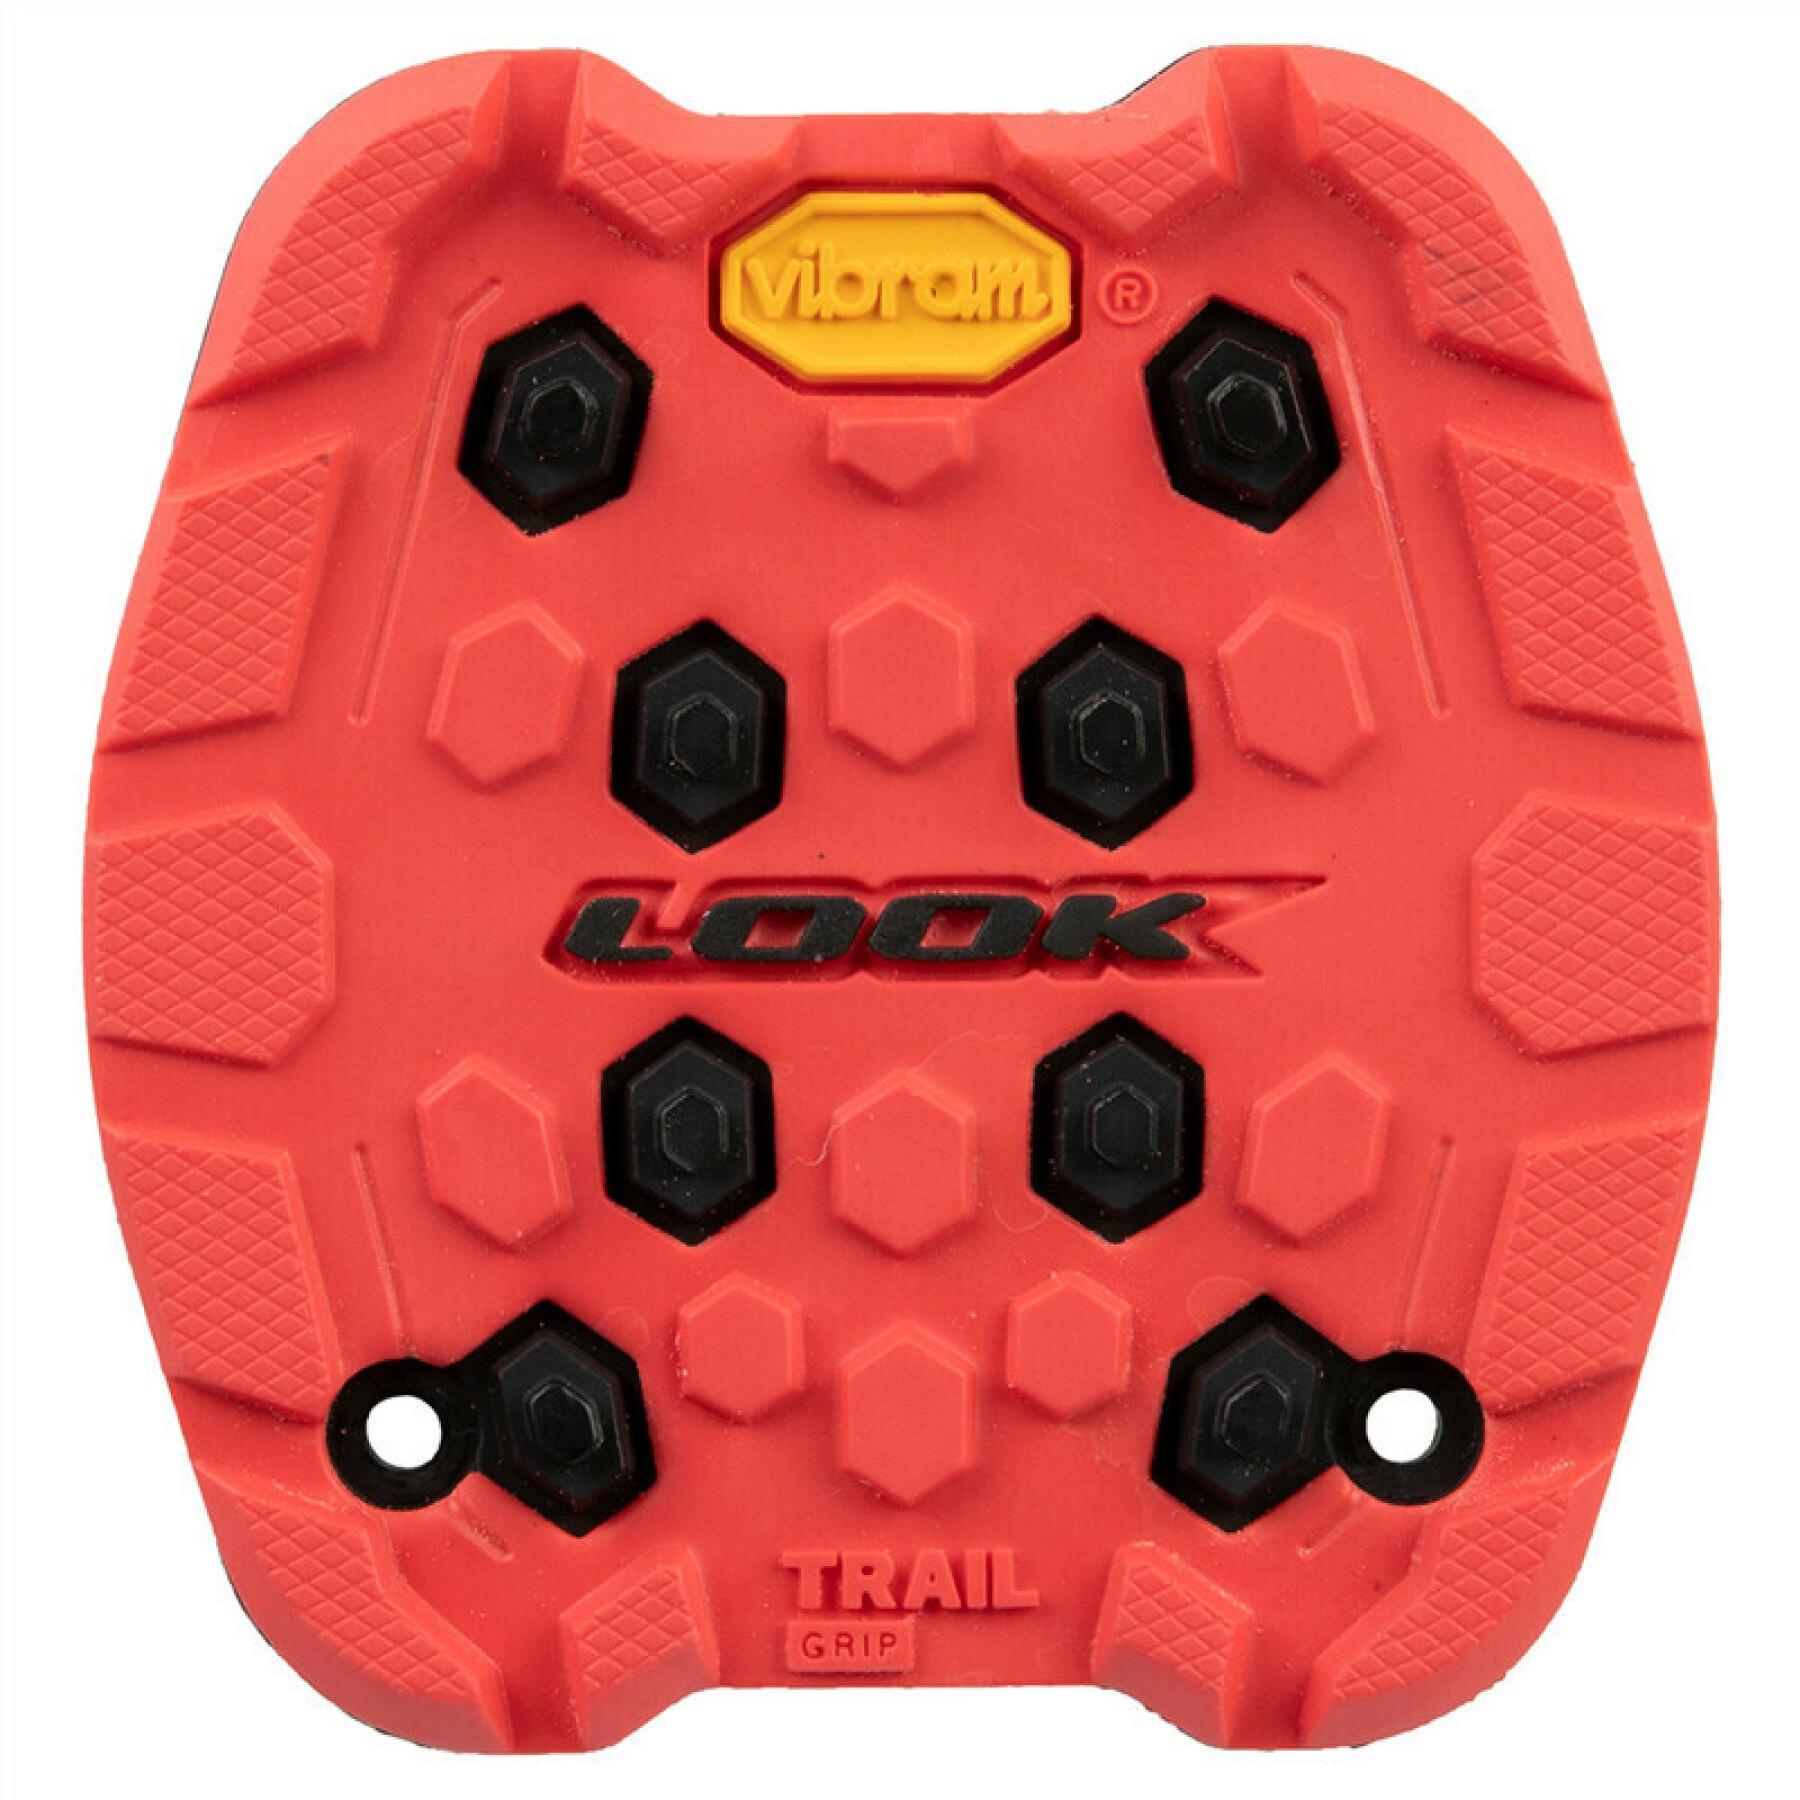 Pedals Look Activ Grip Trail